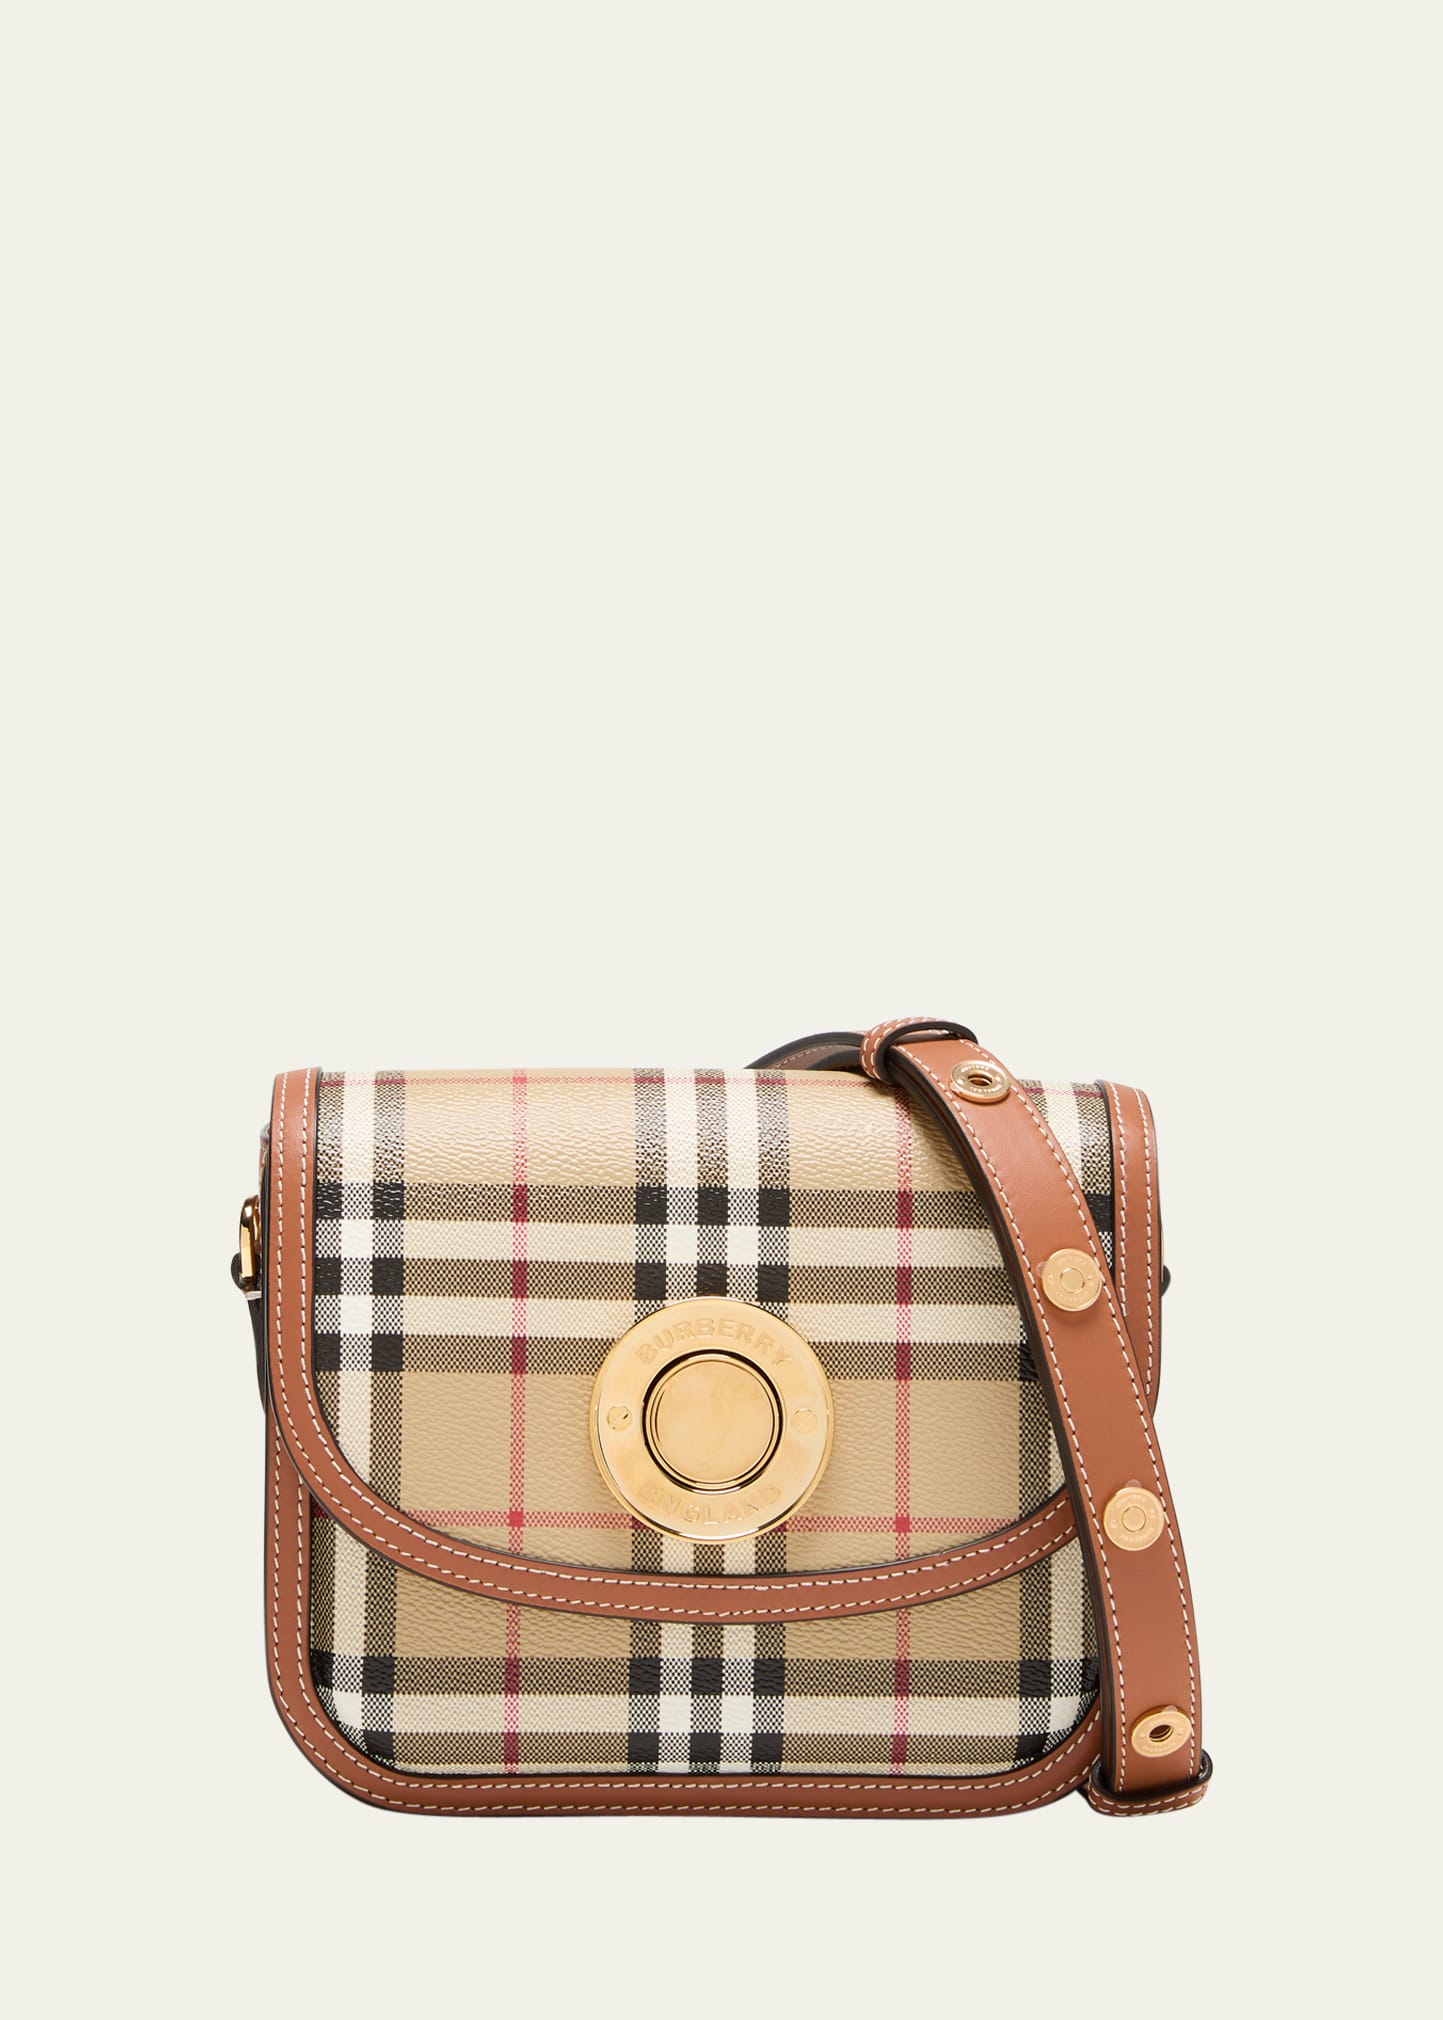 Burberry Elizabeth Small Check Saddle Crossbody Bag In Archive Beige